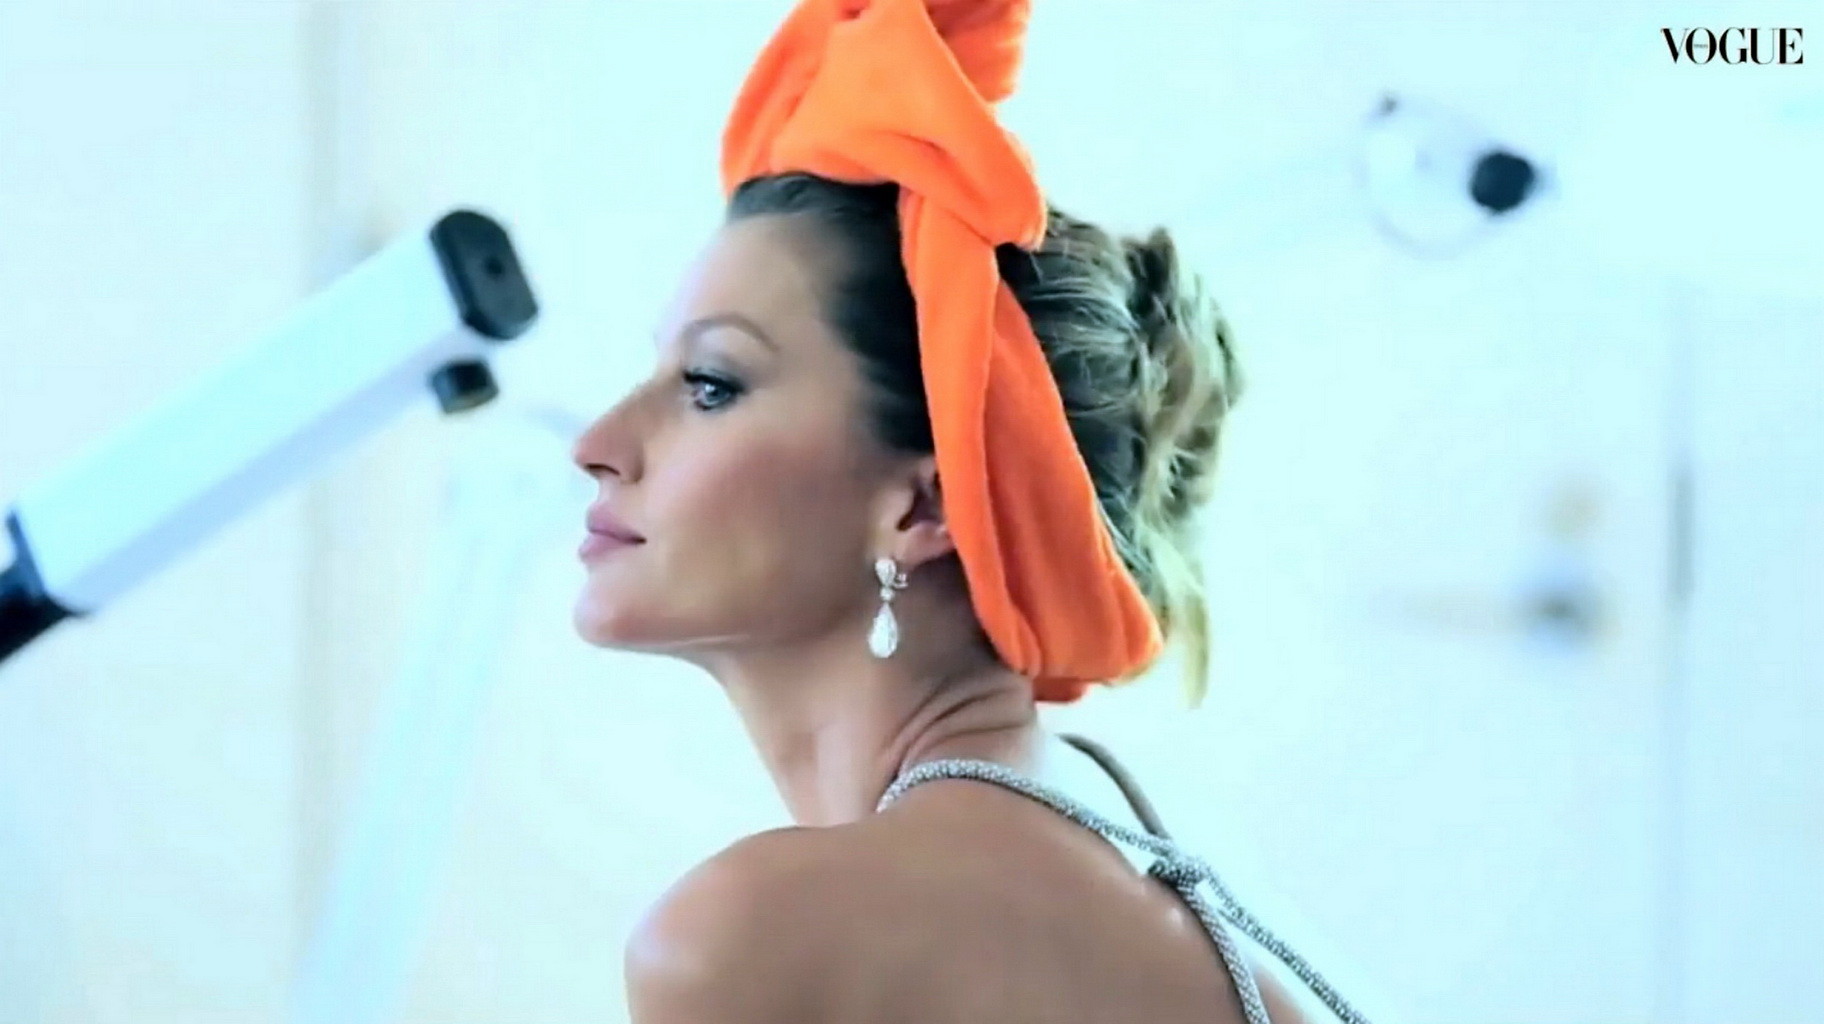 Gisele Bundchen topless in thong but hiding her boobs in Vogue Italia photoshoot #75229858